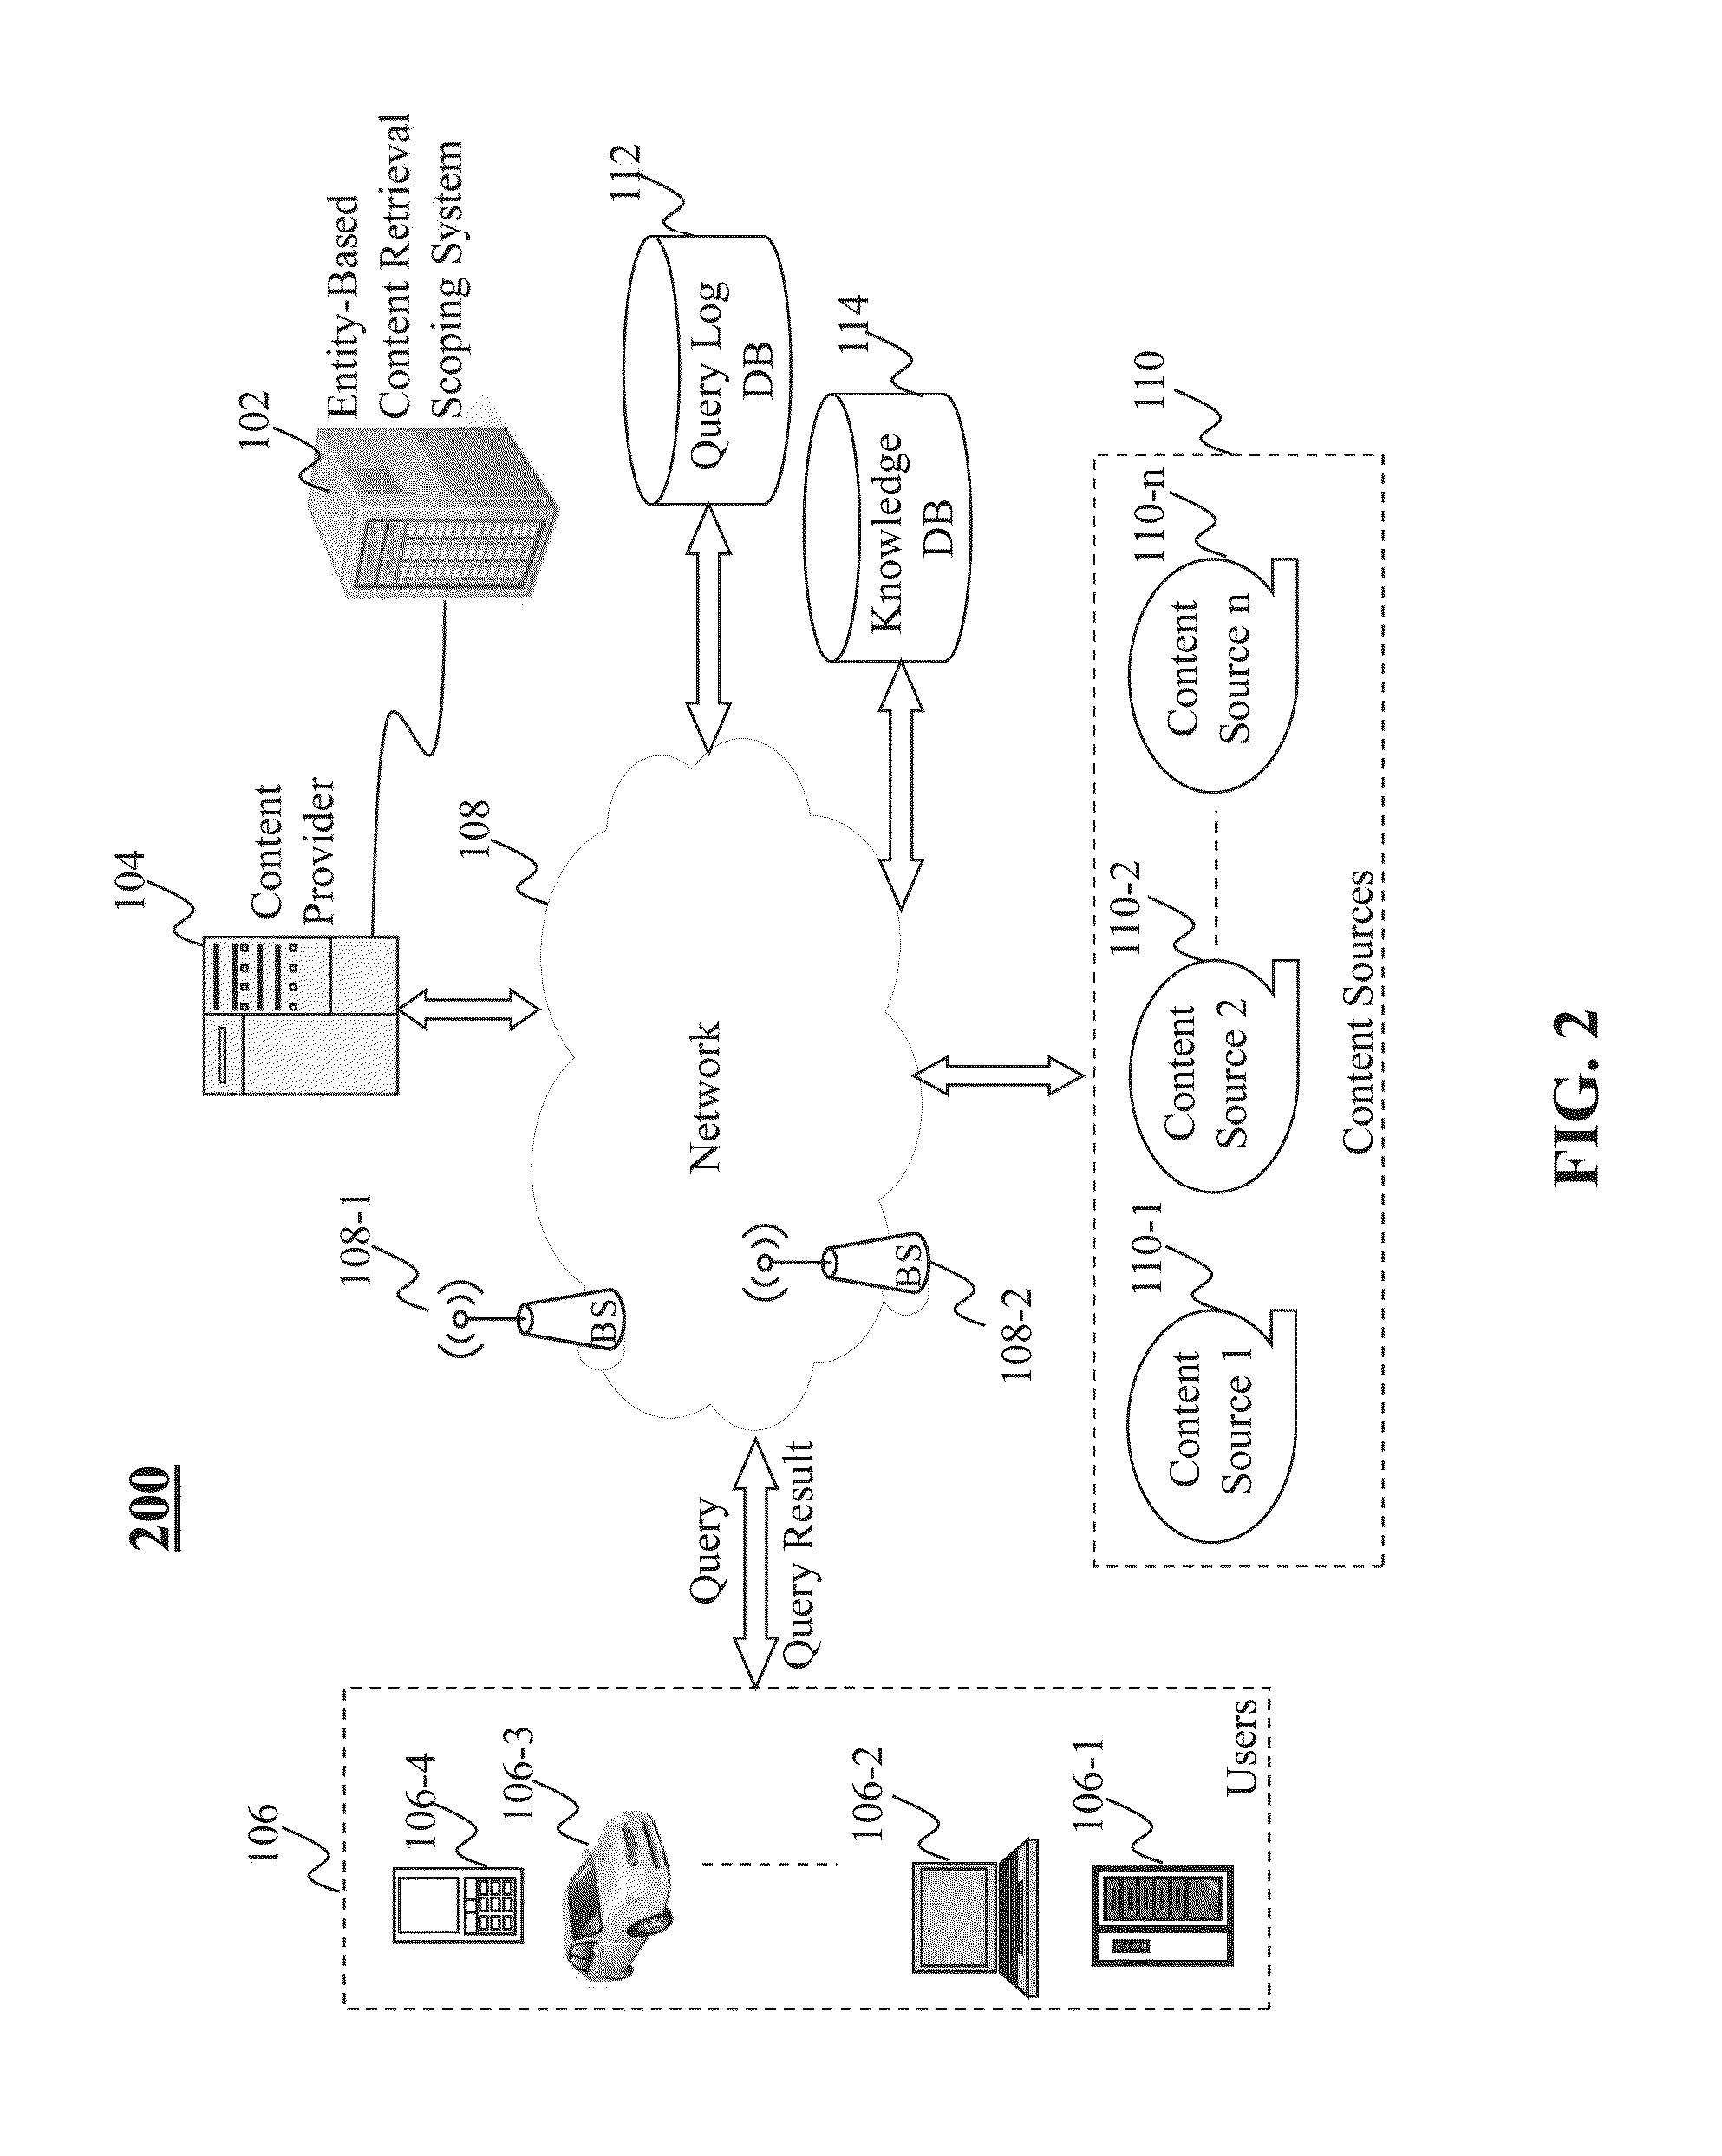 Method and System for Entity Linking